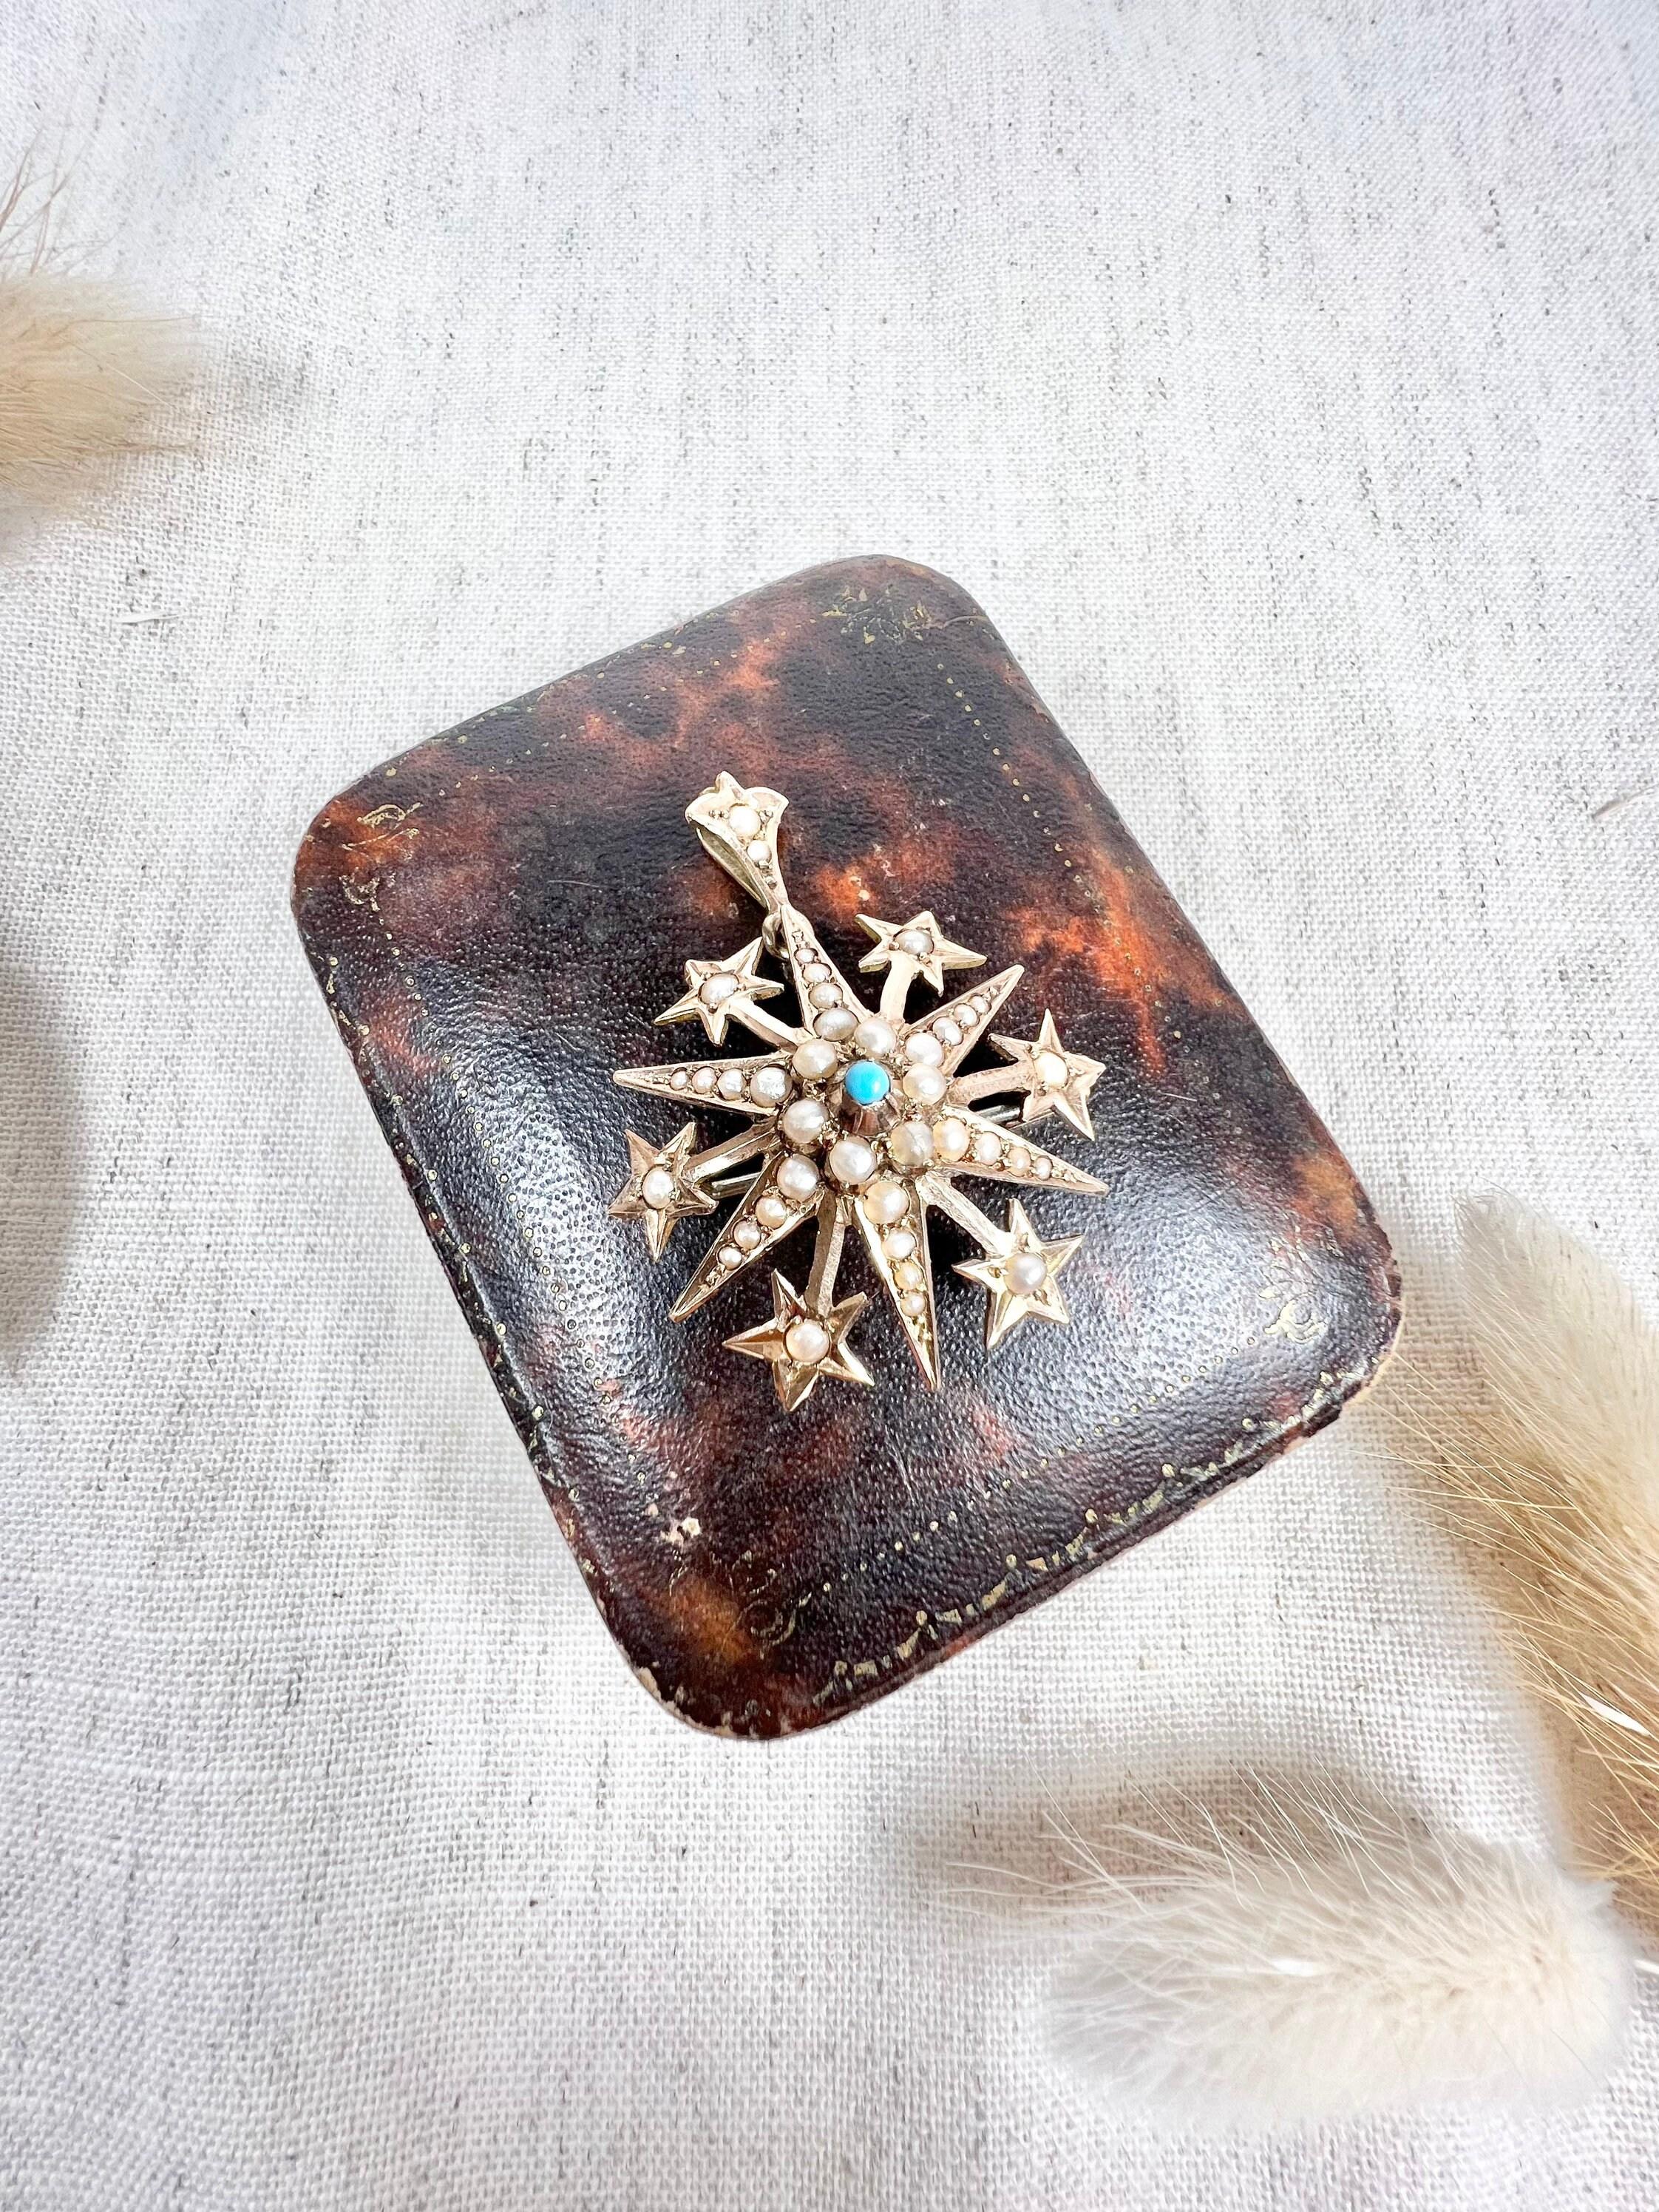 Antique Starburst Pendant

15ct Gold Stamped

Circa 1900

Fabulous, Edwardian six pointed starburst. Set with pretty, natural seed pearls & a turquoise centre. Between each point of the star are six individual stars with seed pearl centres.
Can be